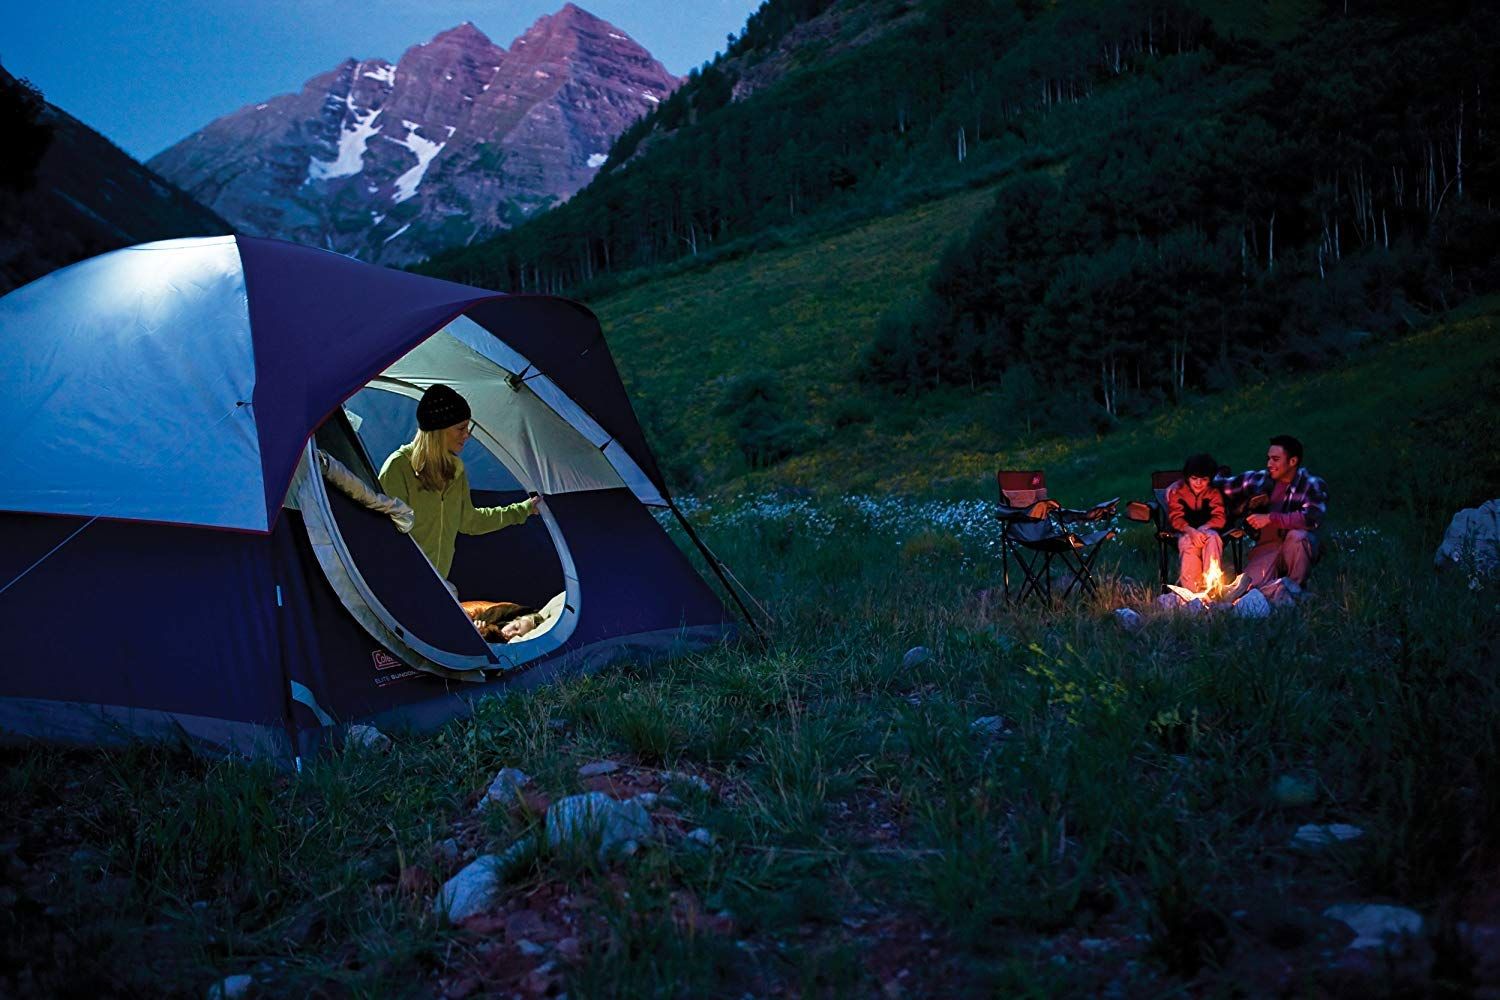 The Very Best Camping Gear, According to Soooo Many Reviews